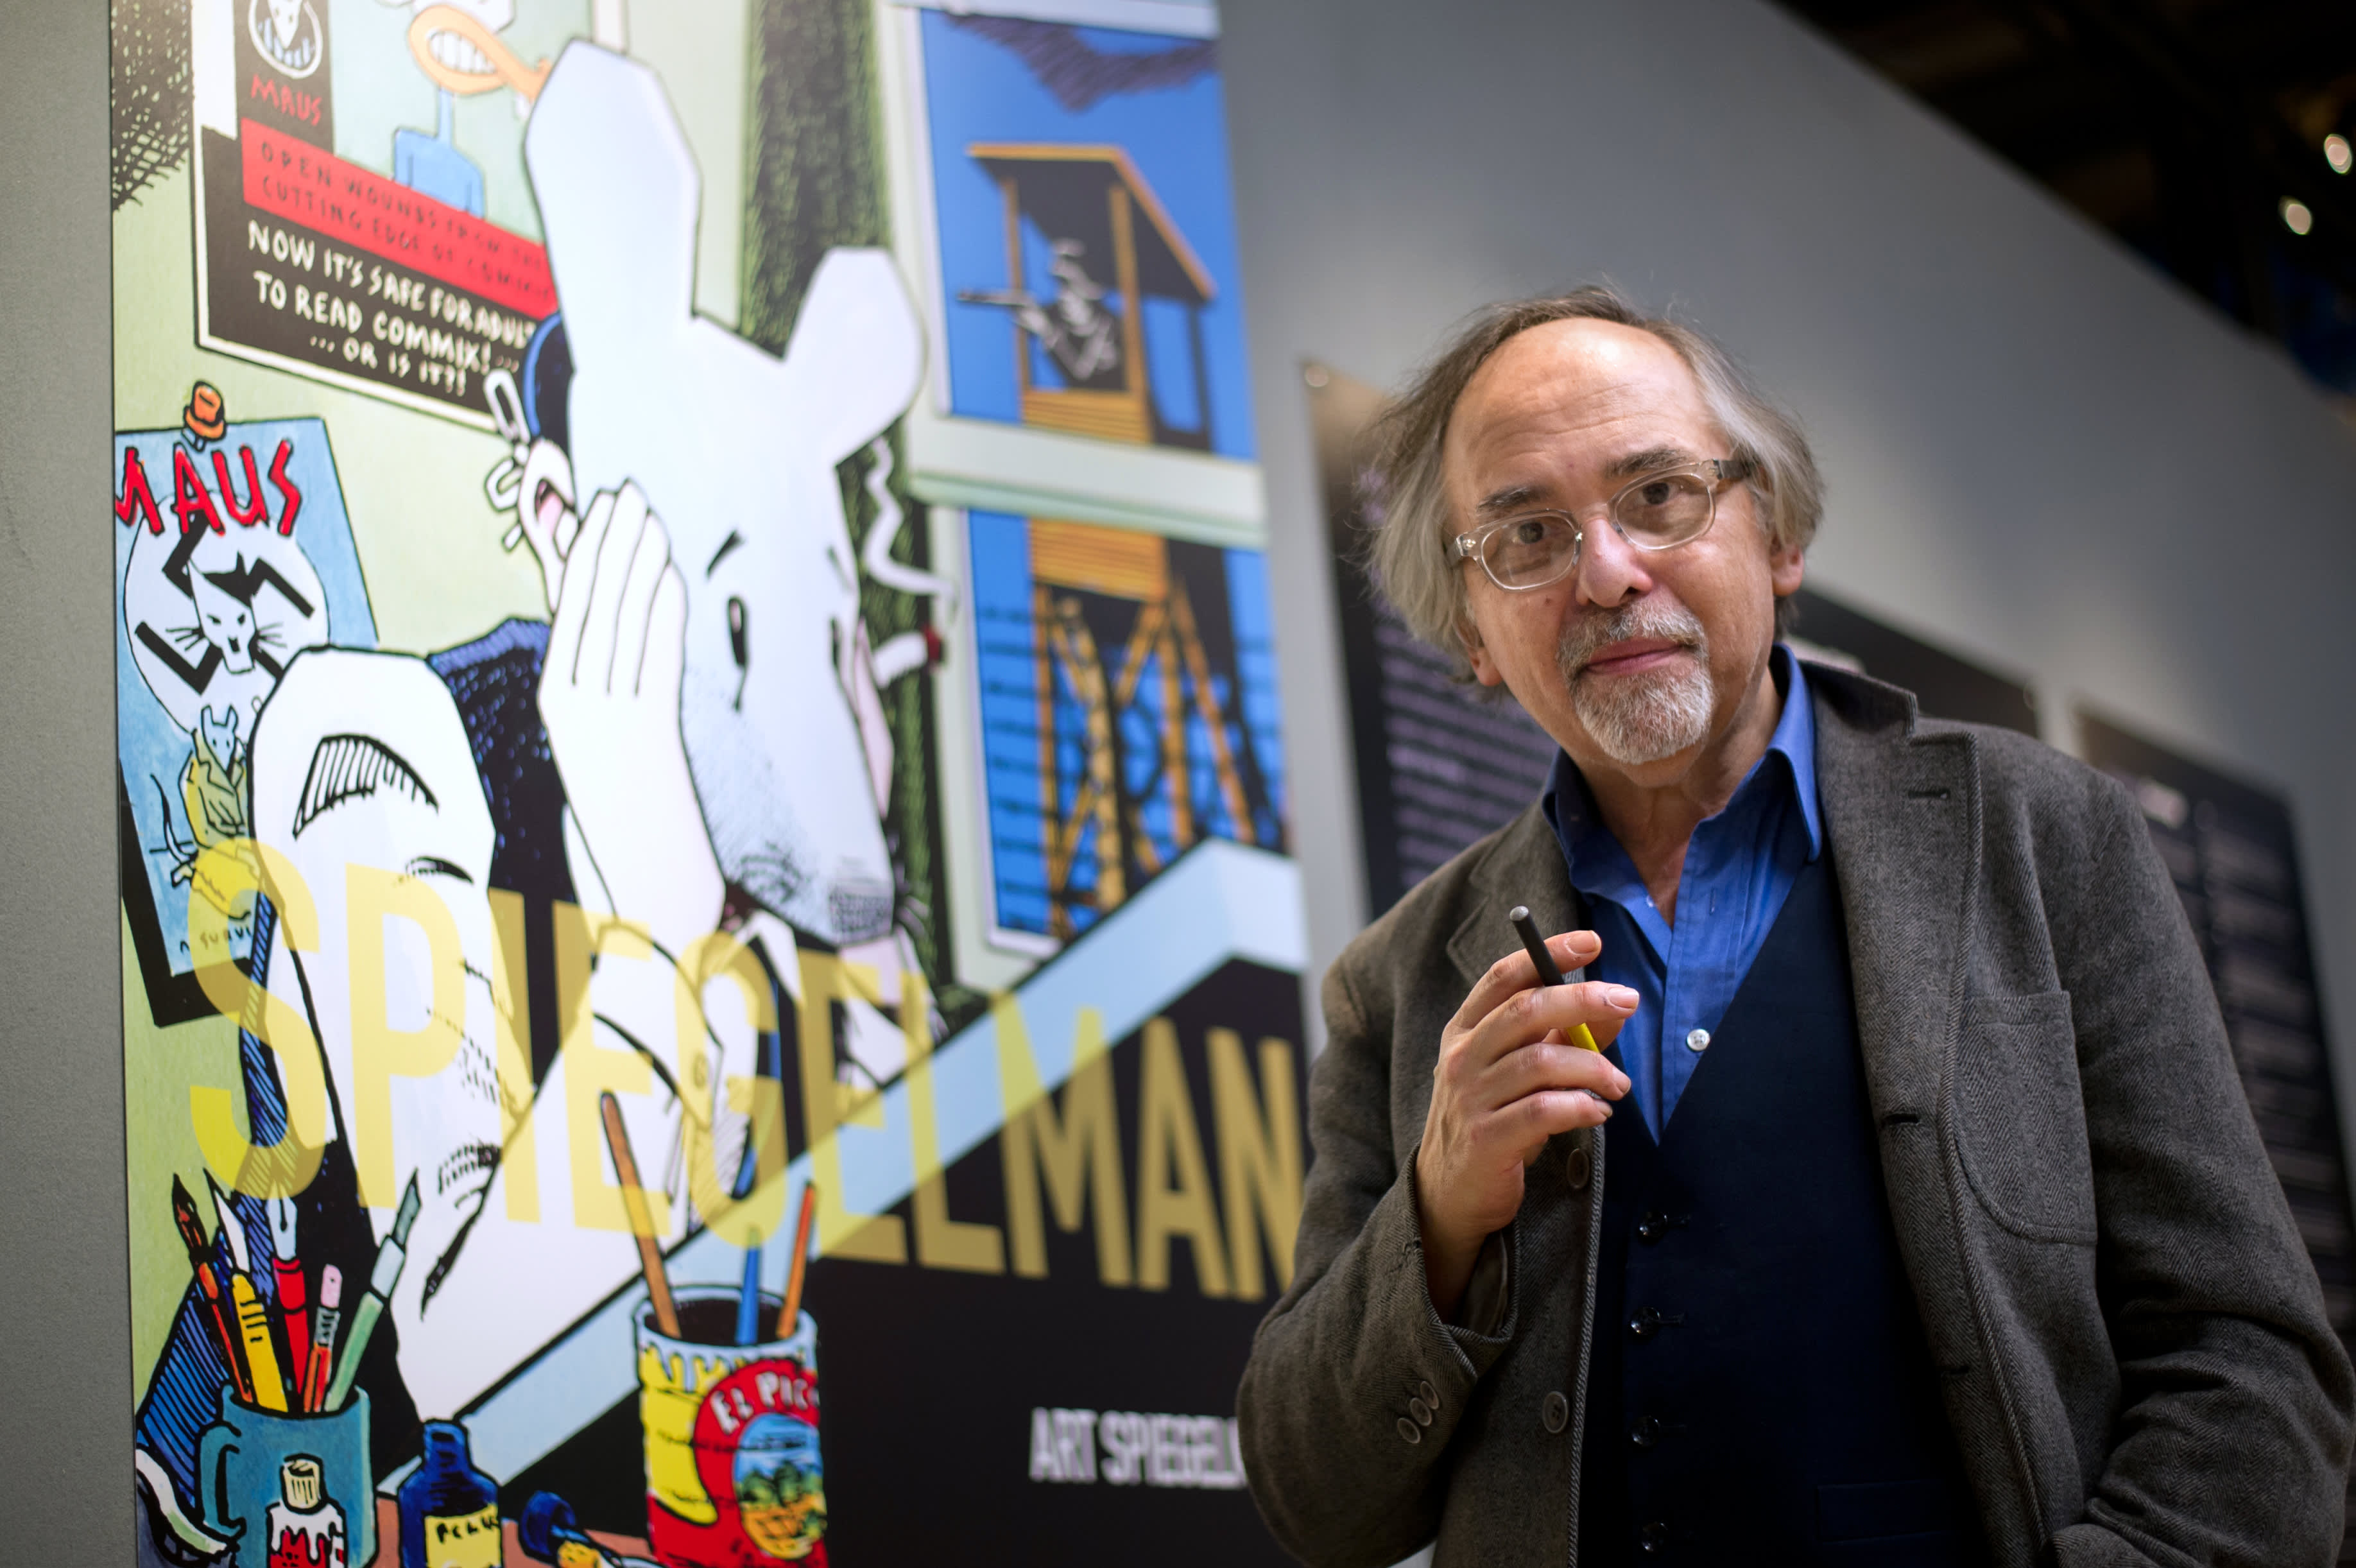 Tennessee school board bans Holocaust graphic novel 'Maus' – author Art Spiegelman condemns the move as 'Orwellian' - CNBC